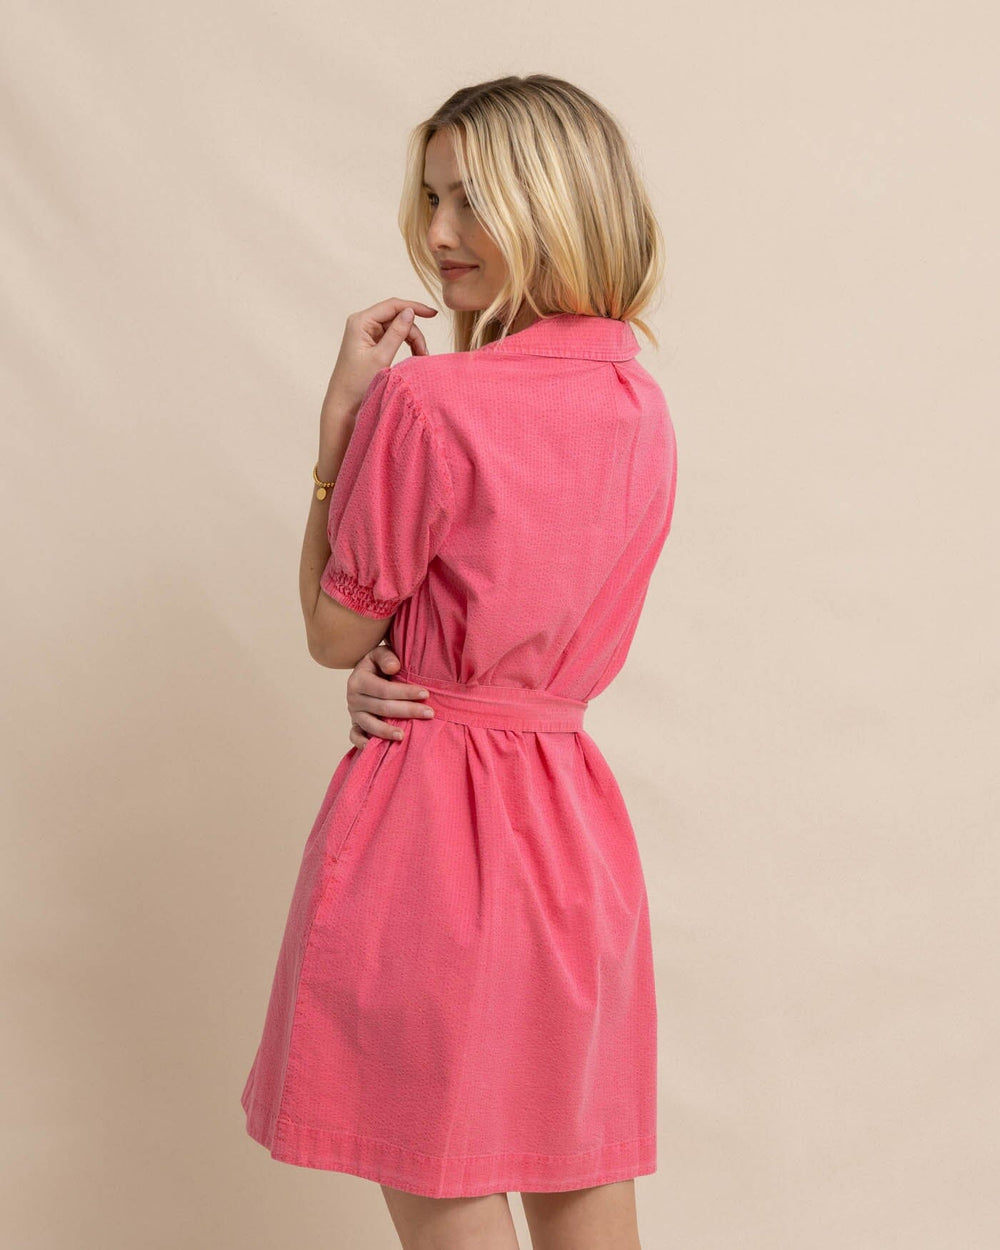 The back view of the Southern Tide Calan Washed Seersucker Dress by Southern Tide - Camelia Rose Pink